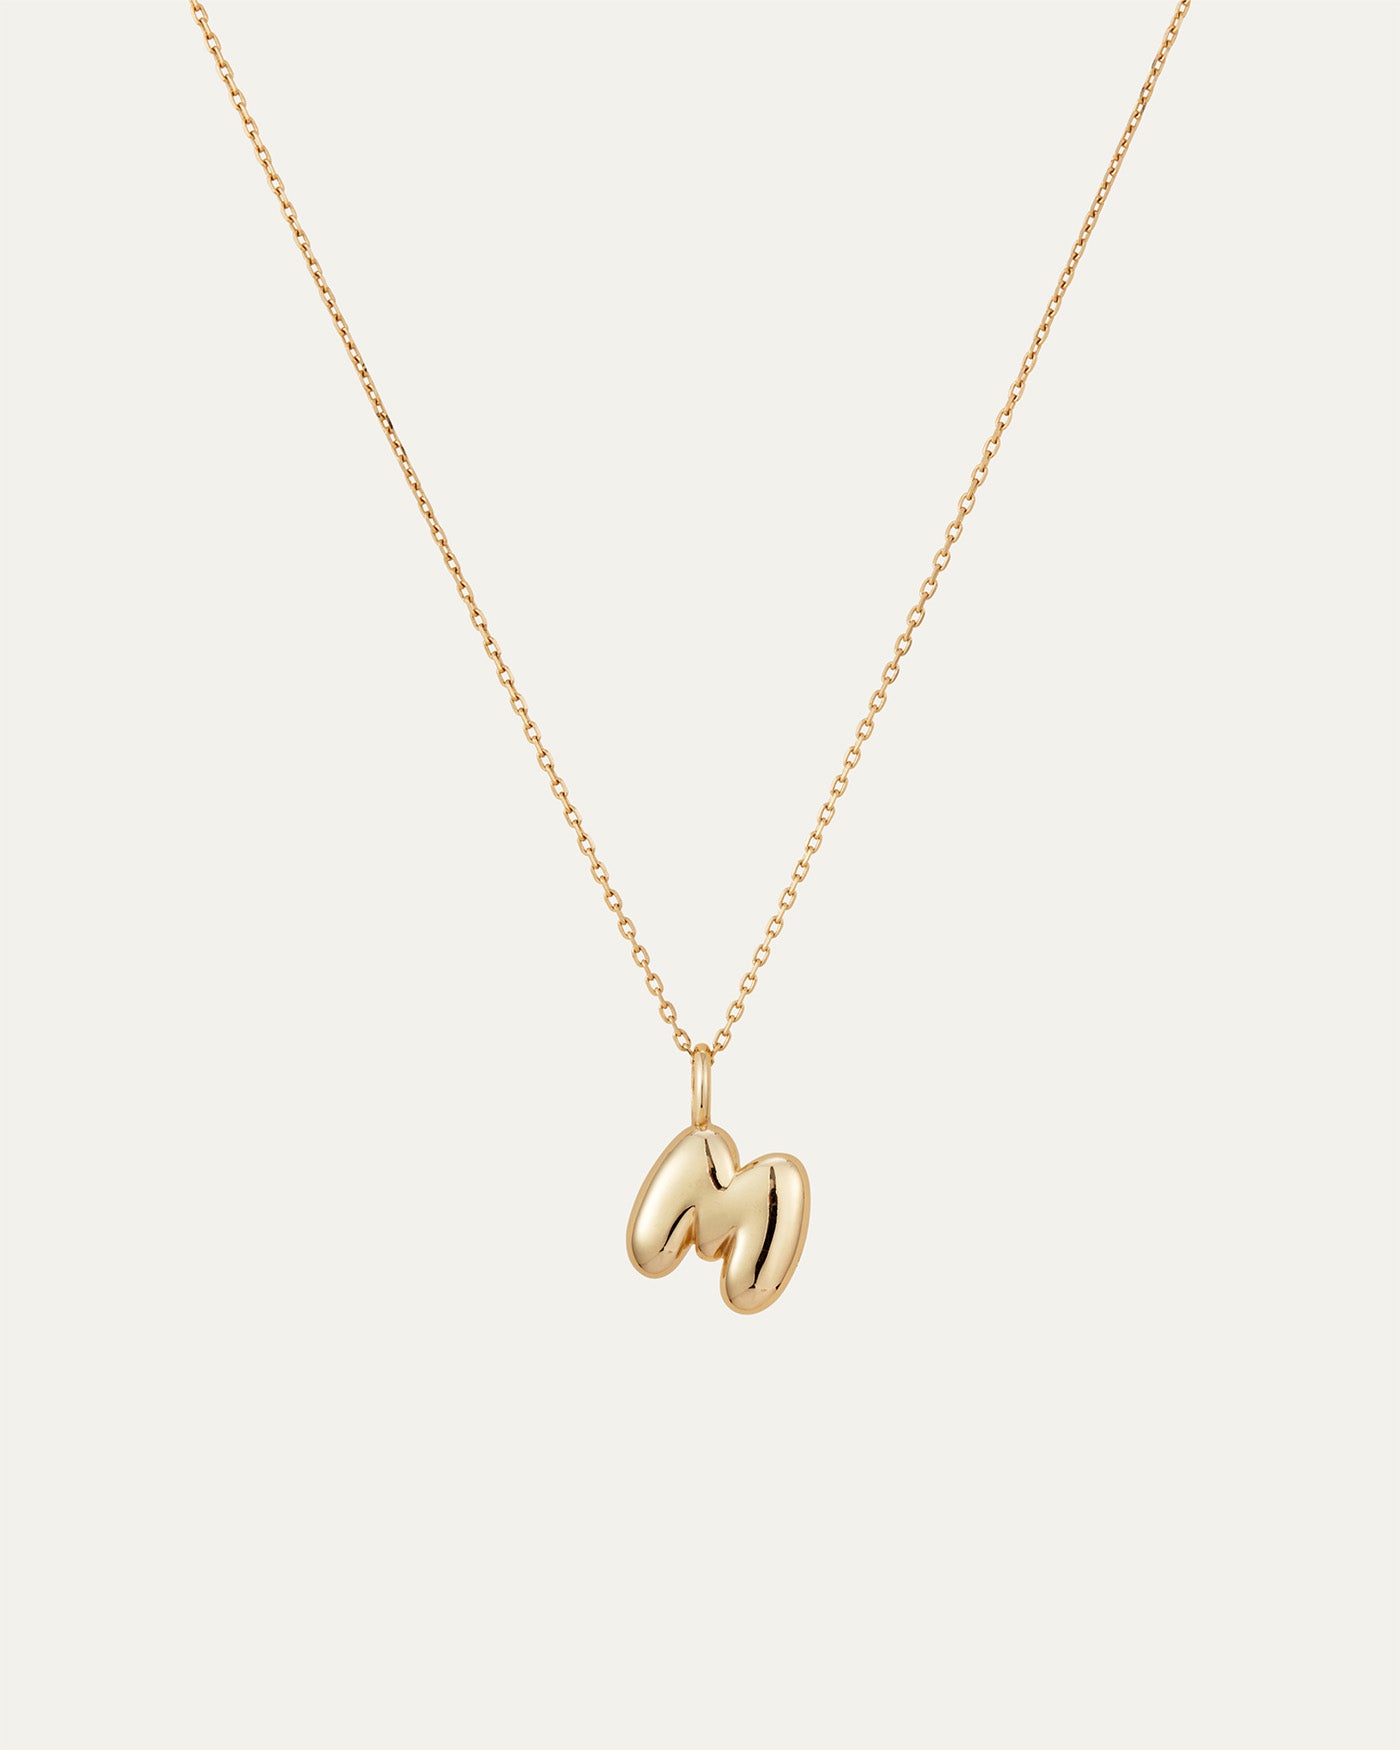 LINK Necklaces | Effortless Style. Every Day.